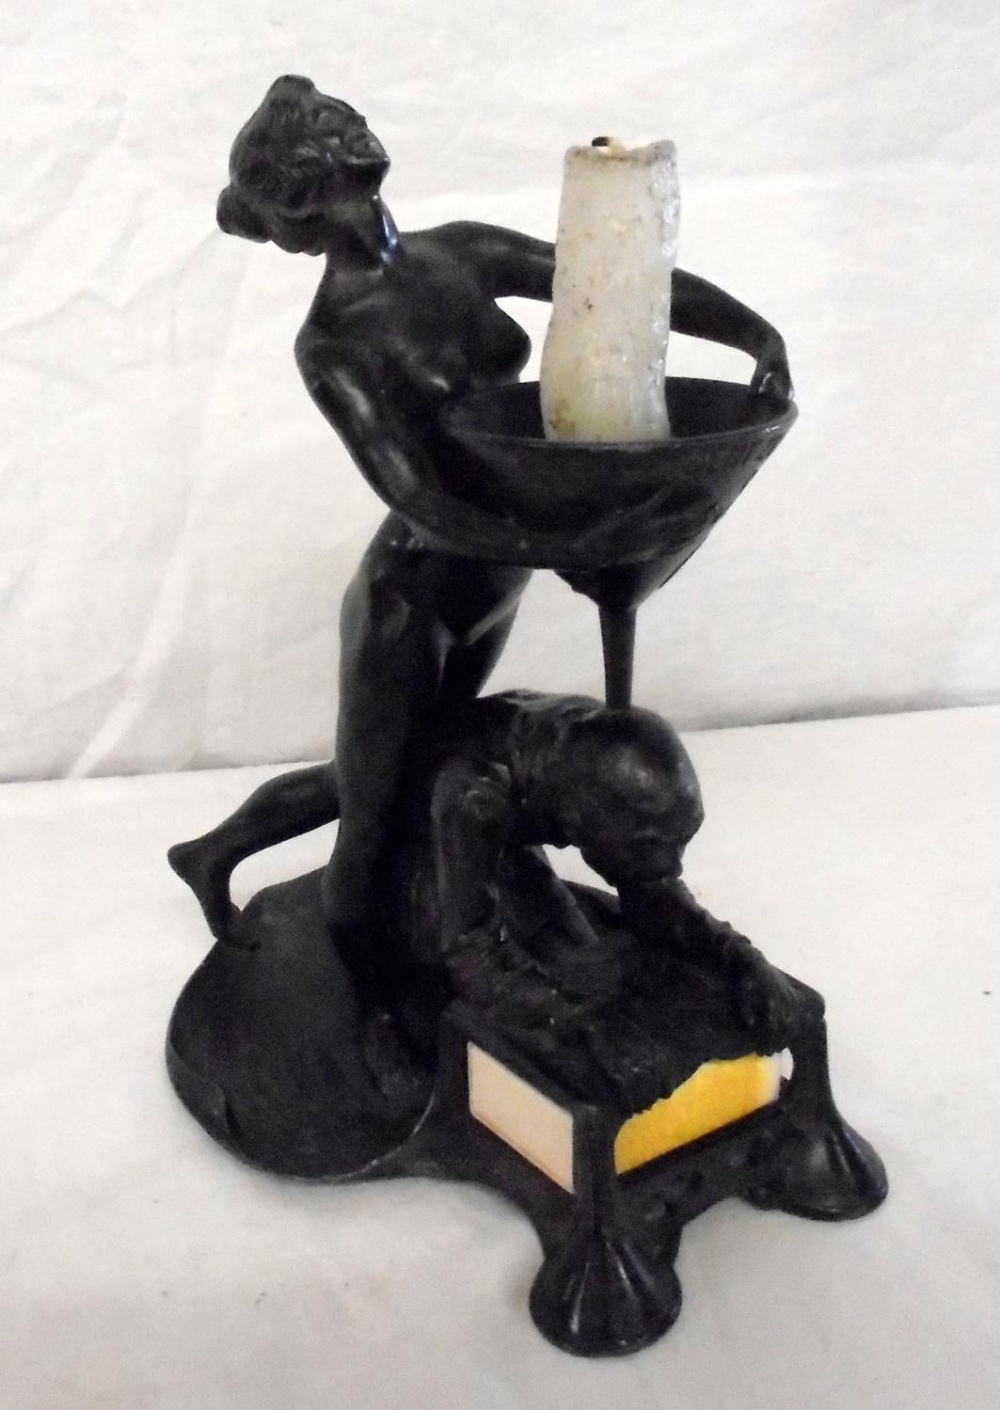 Early C20th German Spelter Candle/Match Holder modelled as gentleman kneeling on lily pad over a - Image 3 of 3